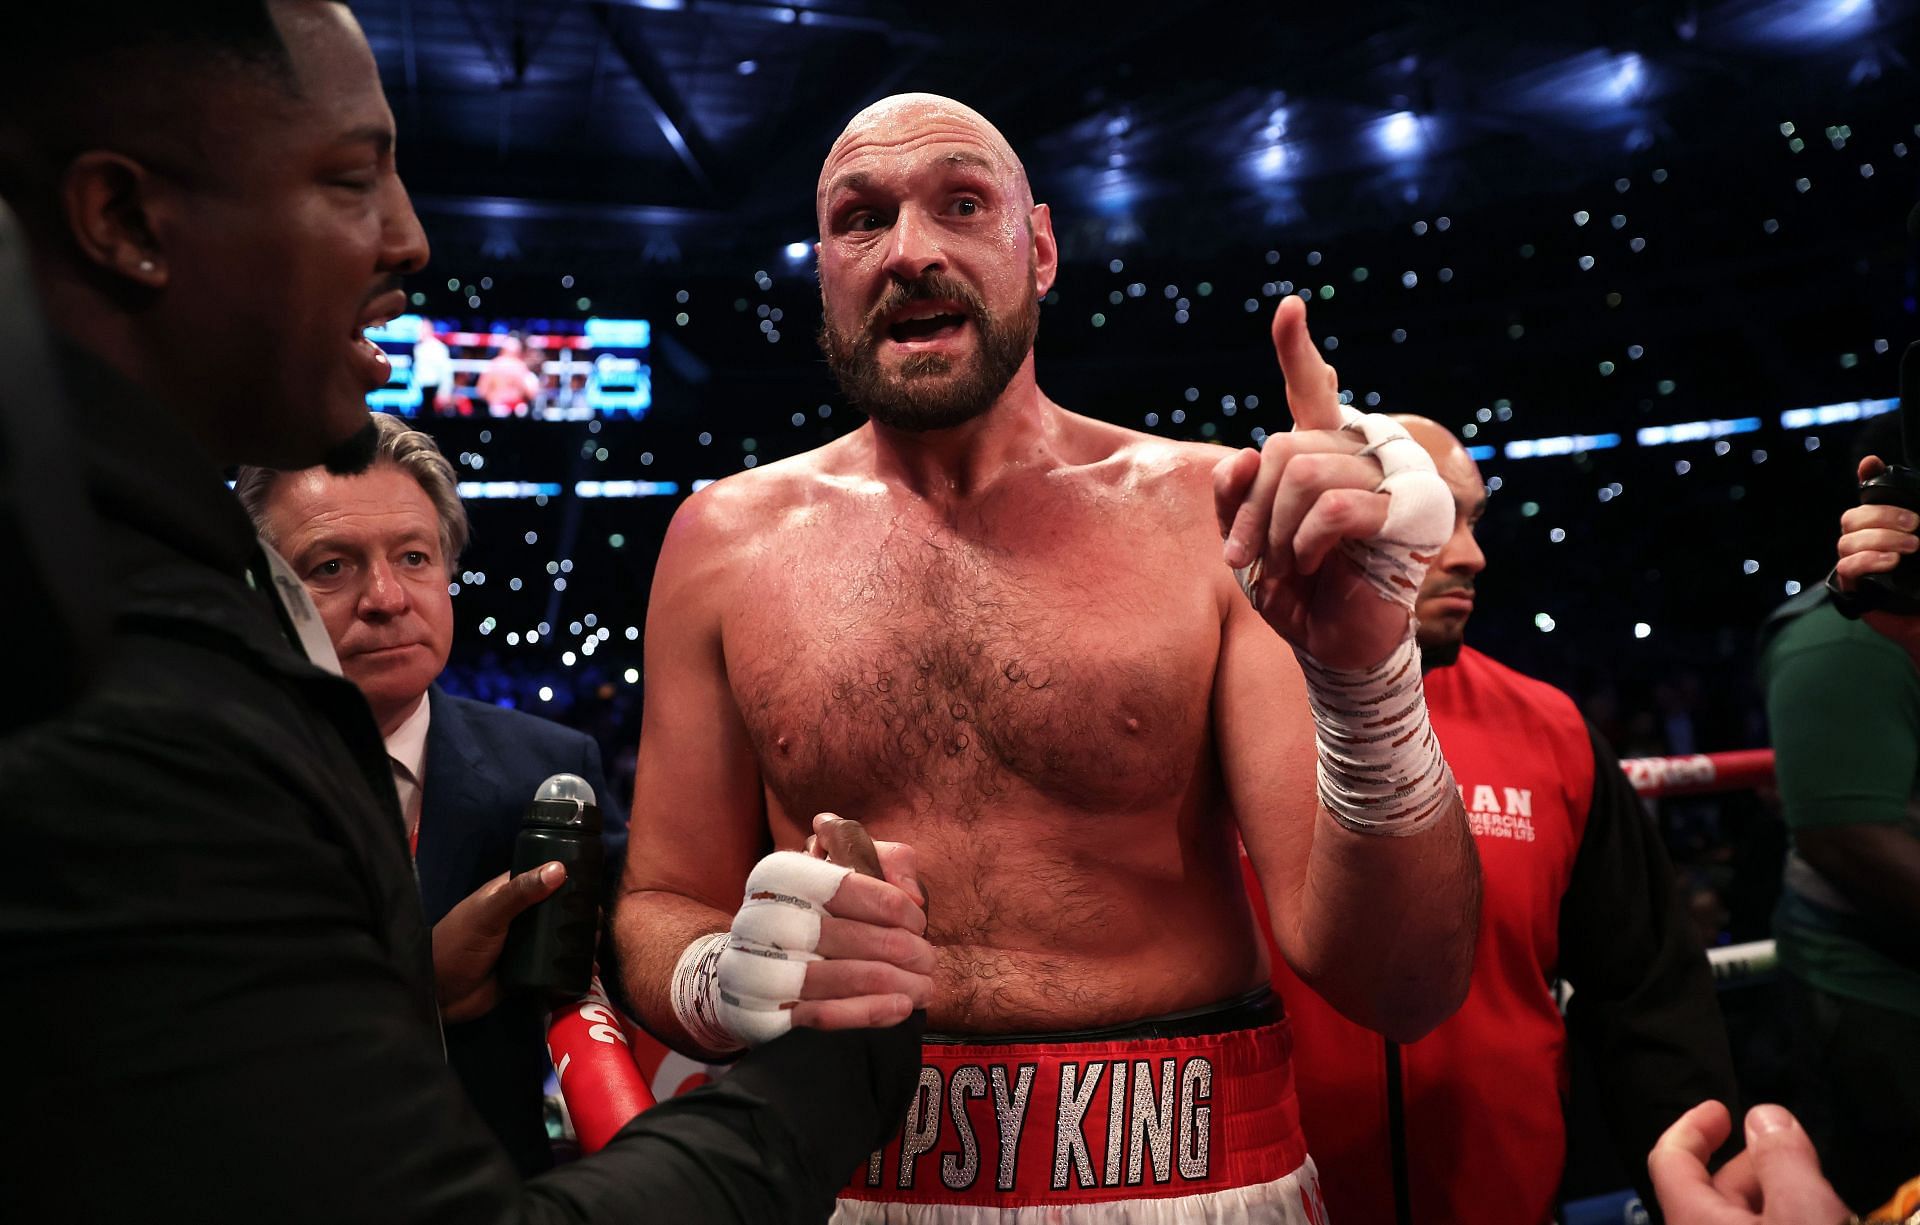 Tyson Fury would likely deal with Francis Ngannou handily in the boxing ring